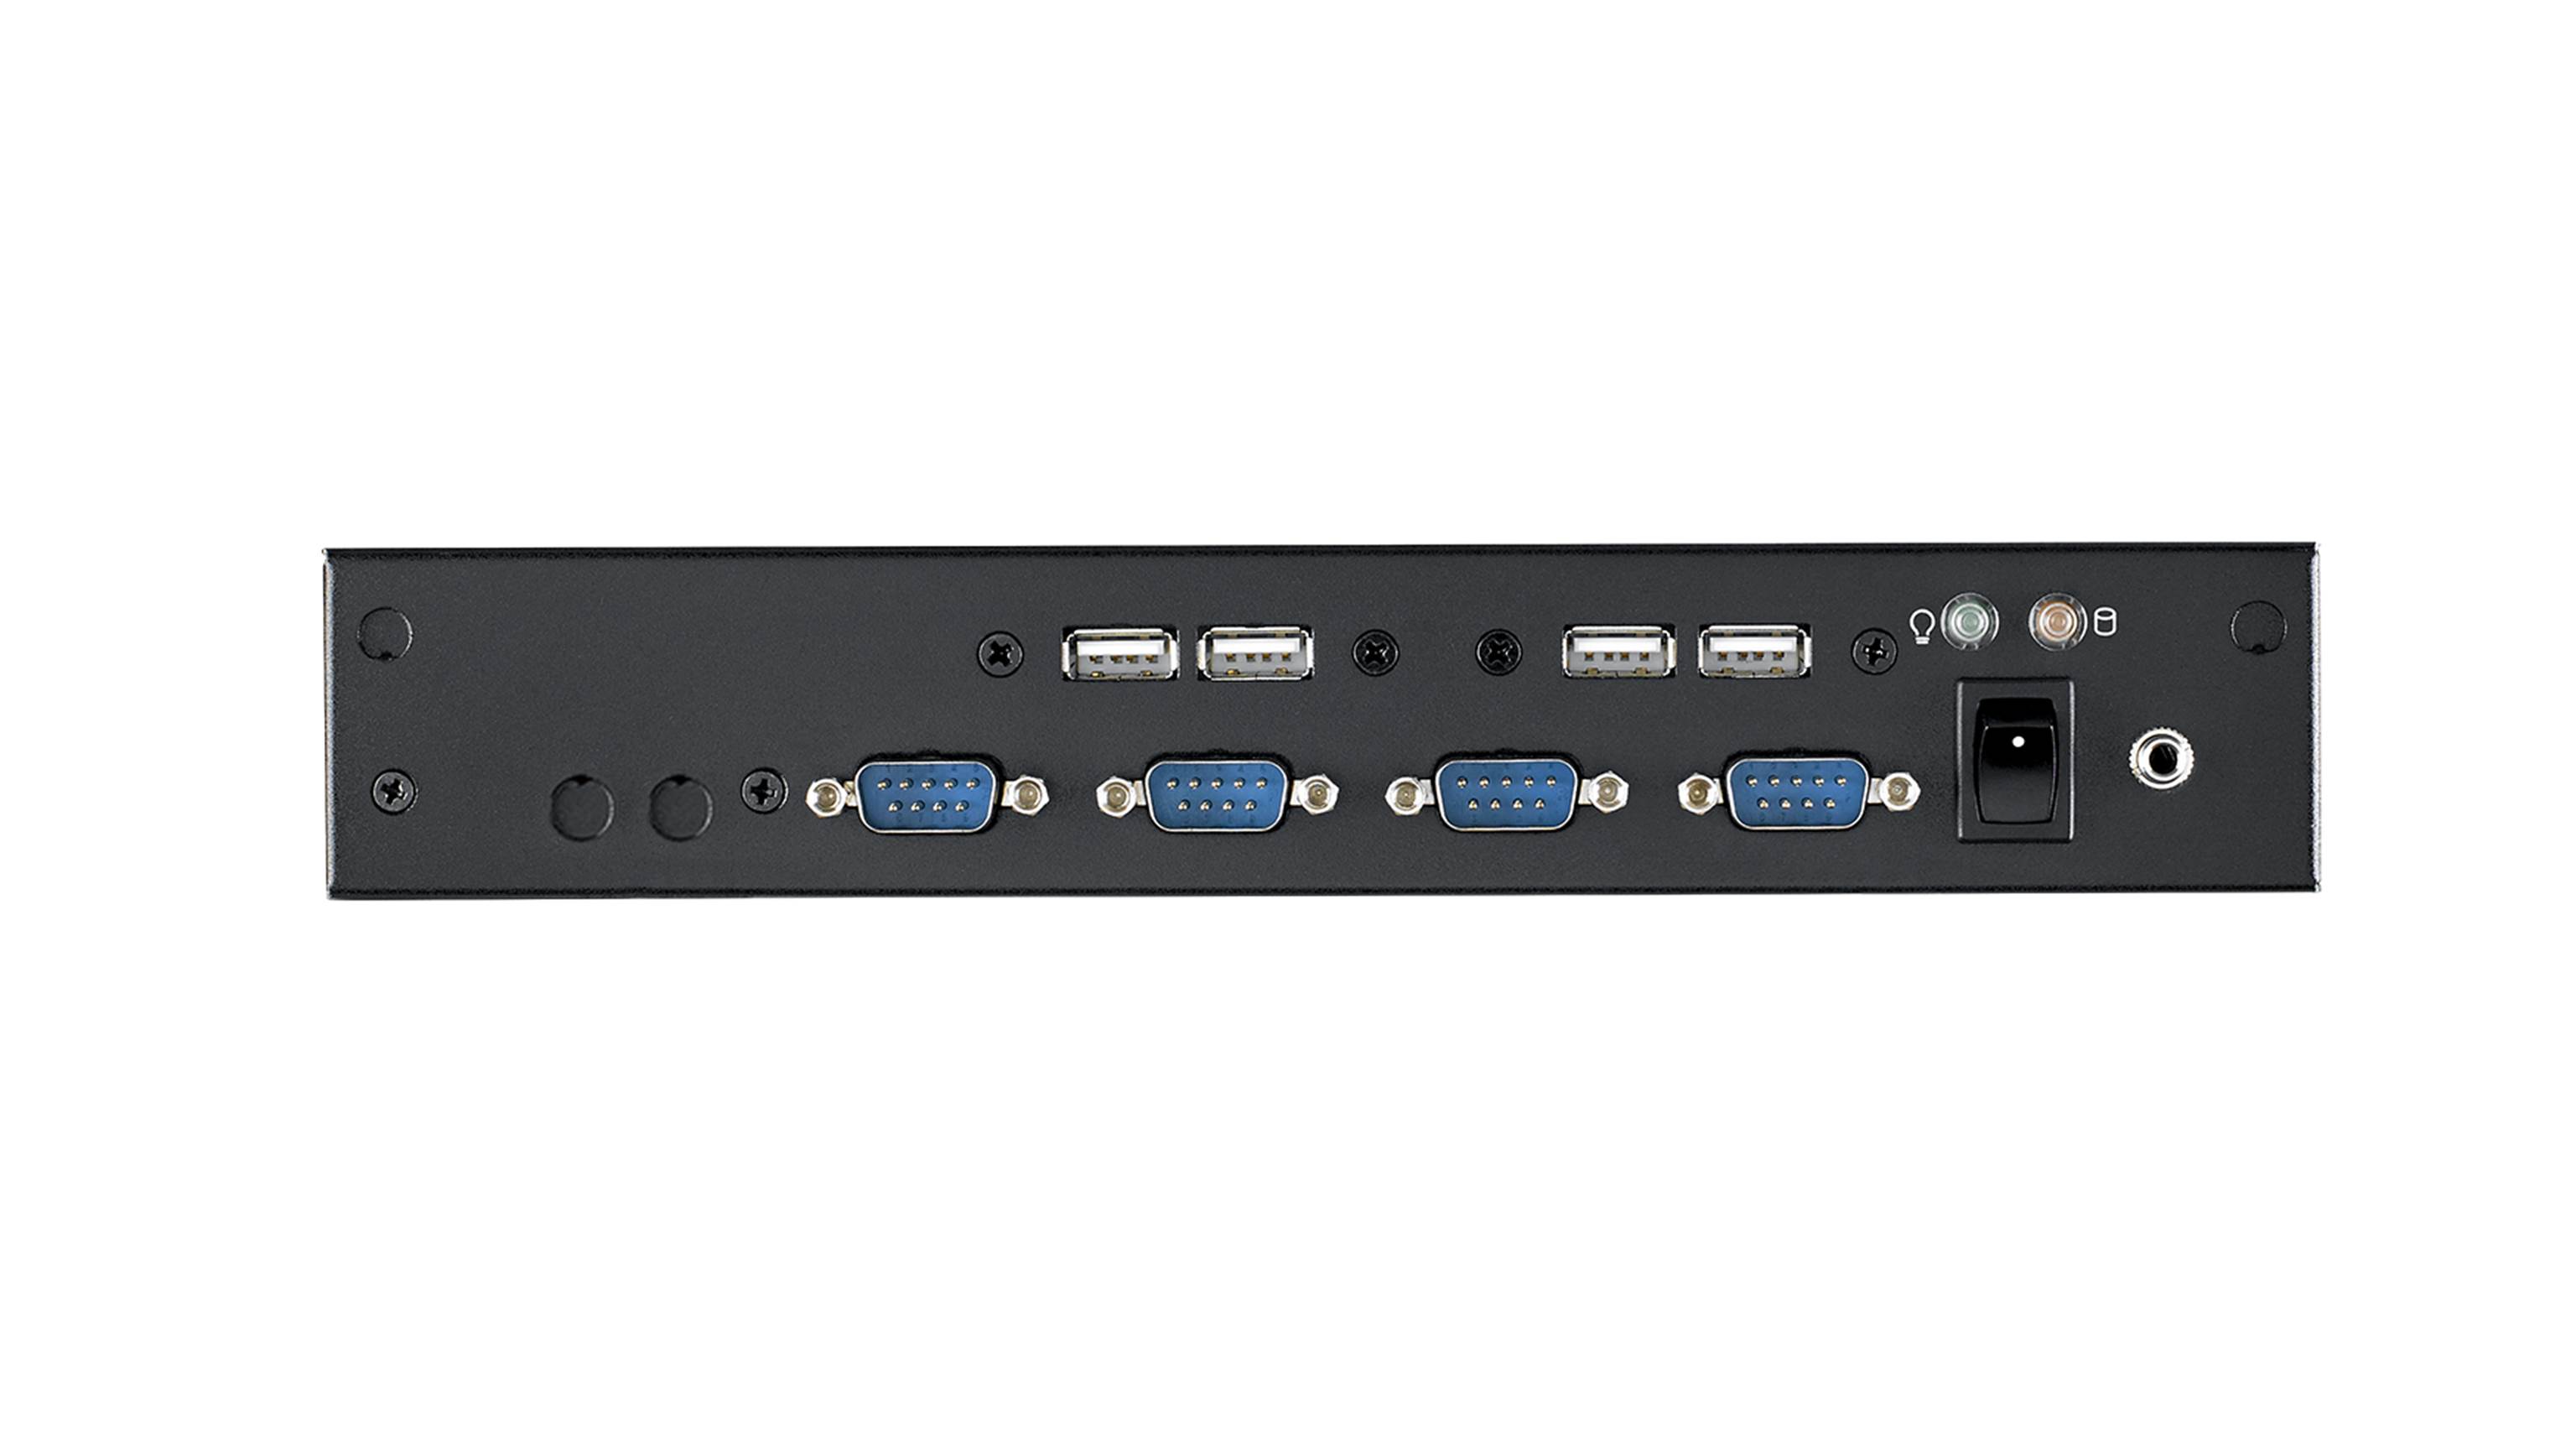 Fan-base Embedded Computer EPC-T2286 barebone with Intel Core i7-8700 (65W), 4x USB, 4x COM, up to 2x Antennas, DP/HDMI and CE / FCC / CCC certifications.